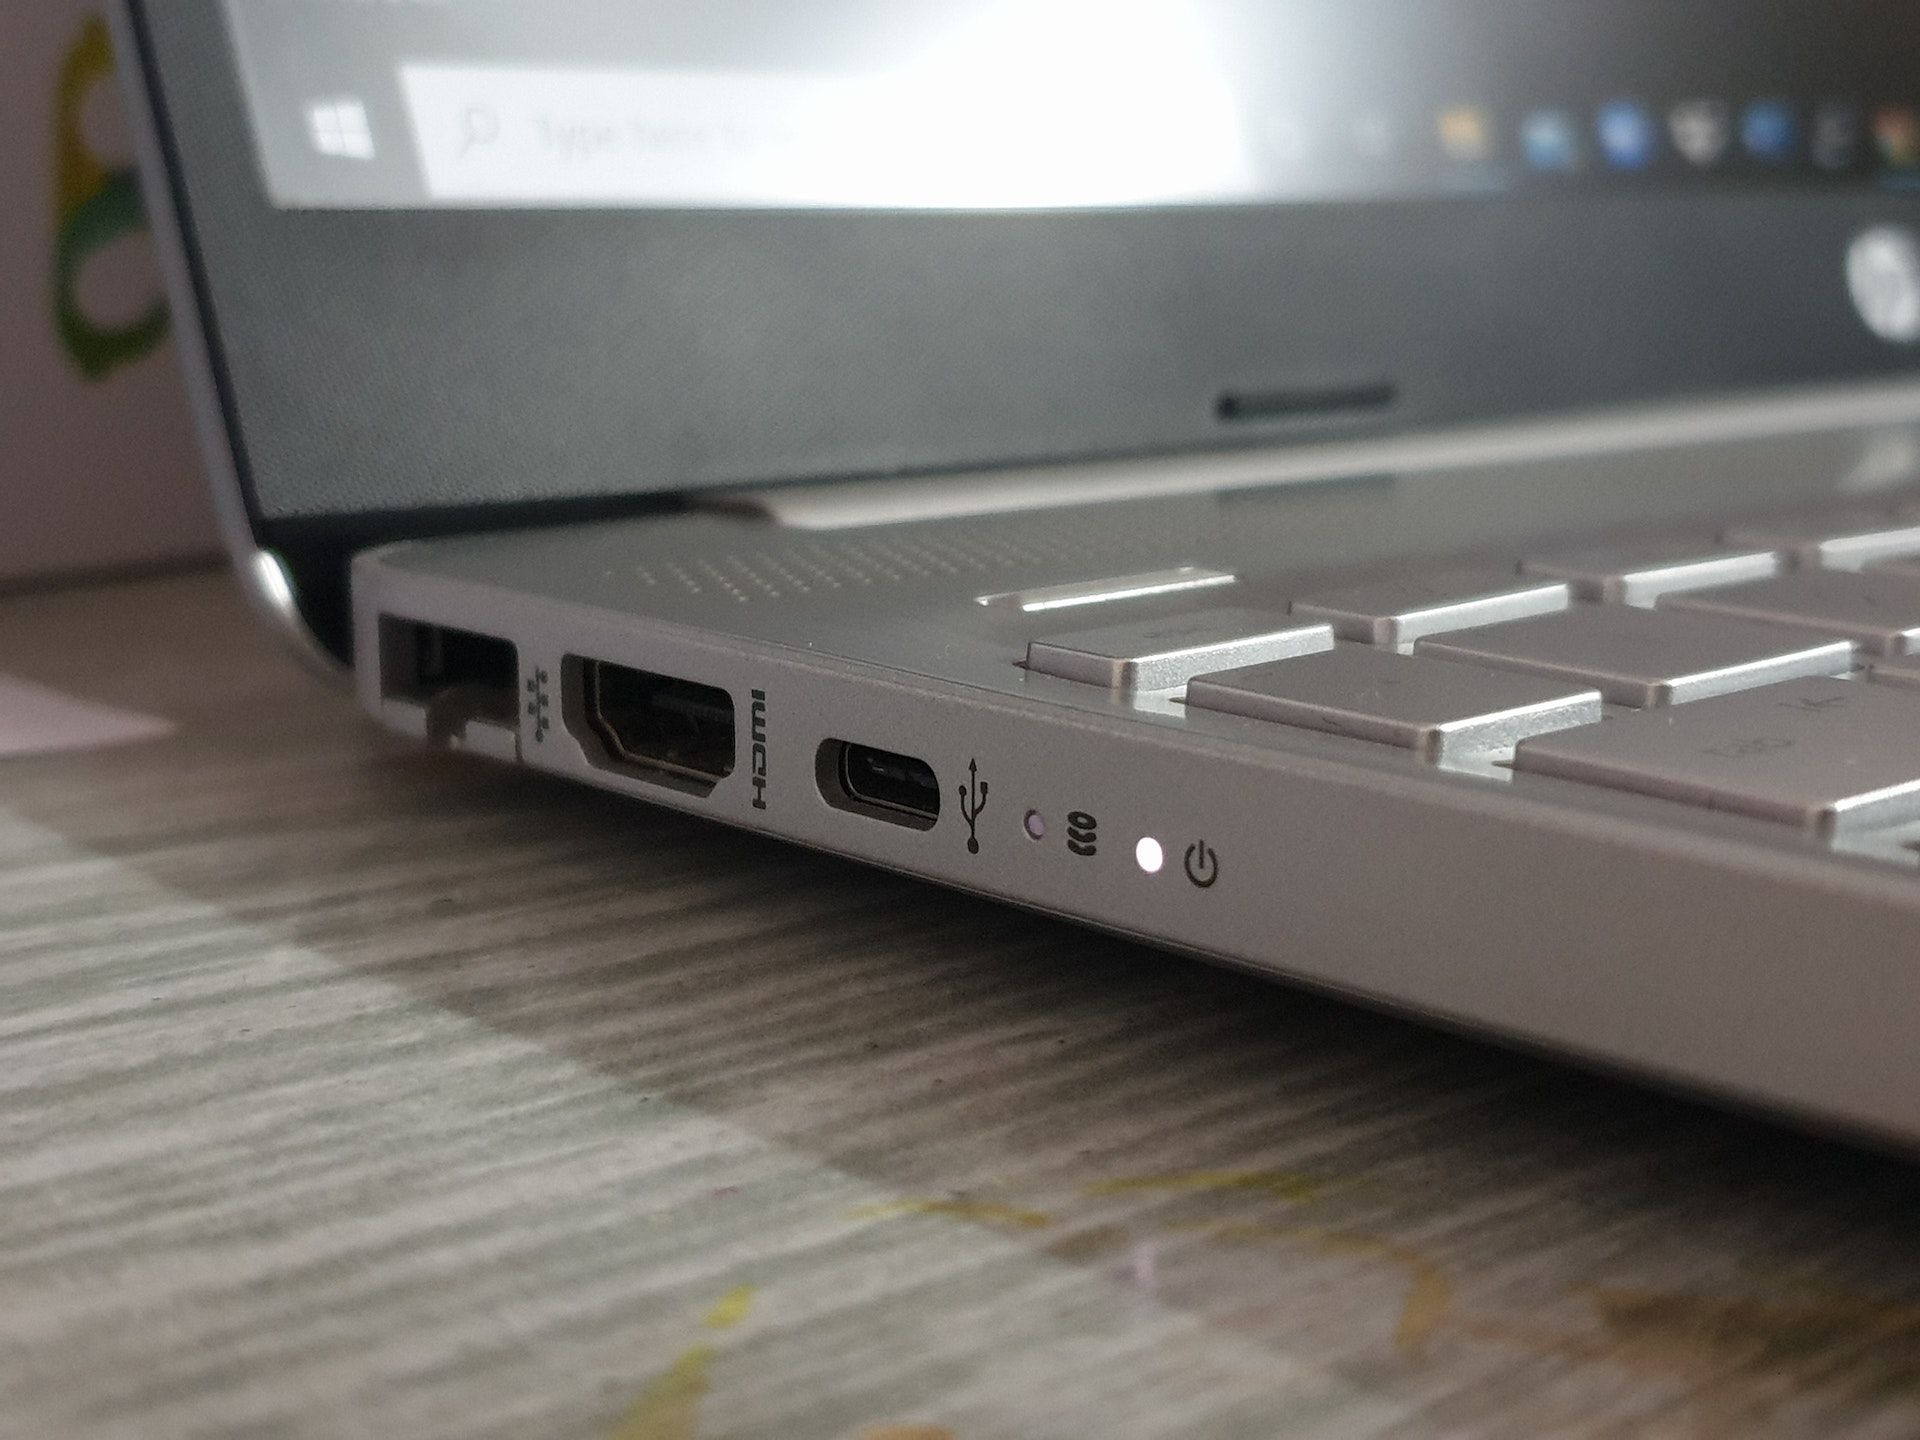 A Close-Up Shot of the Ports of a Laptop